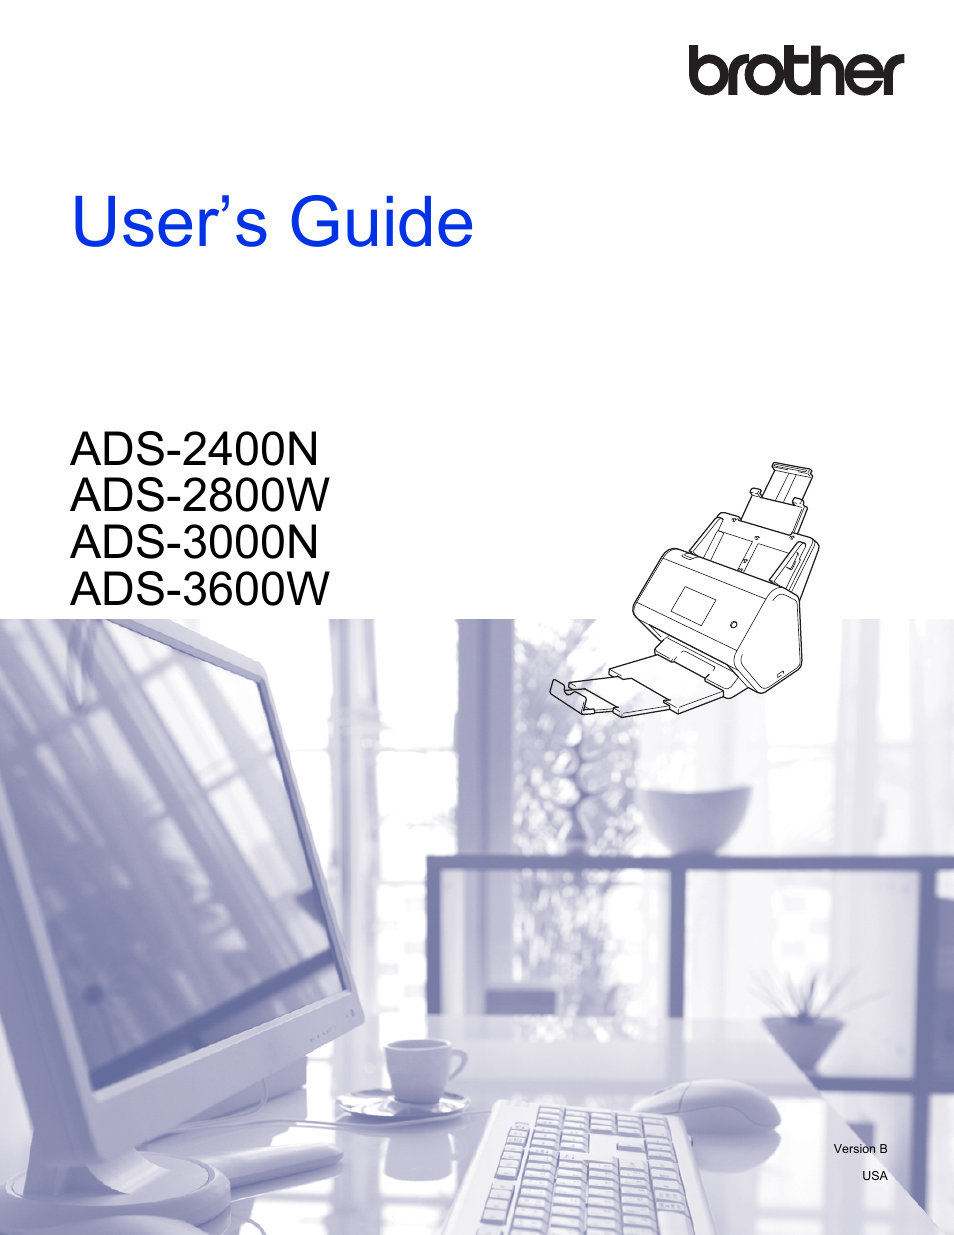 Brother ADS-2400N User Manual | 319 pages | Also for: ADS-2800W, ADS-3000N,  ADS-3600W